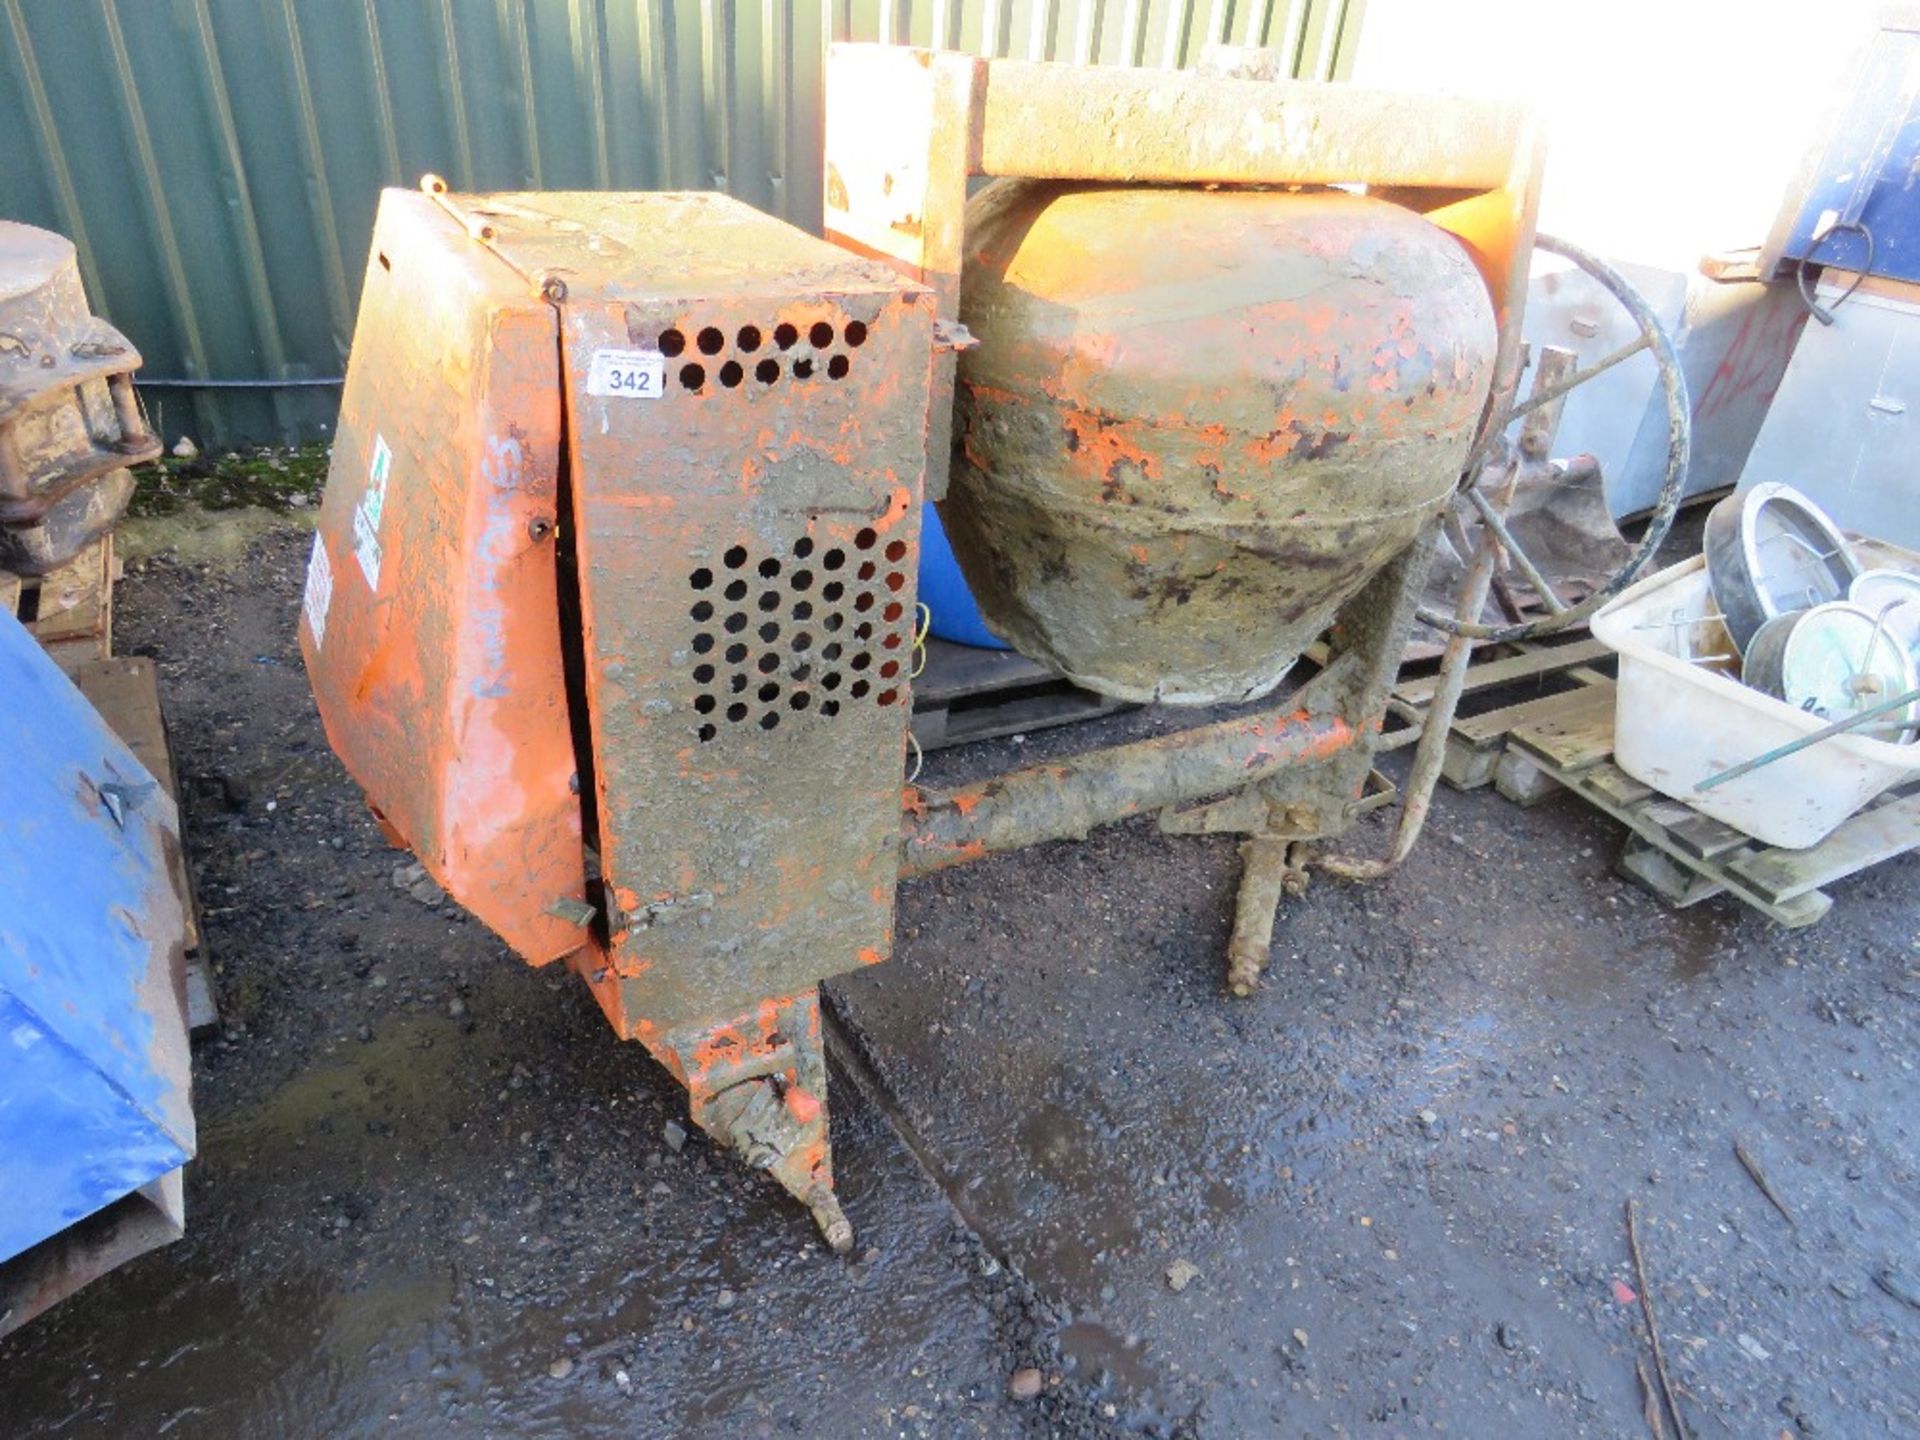 BELLE DIESEL SITE MIXER. ELECTRIC START YANMAR ENGINE. YEAR 2014. SOURCED FROM COMPANY LIQUIDATION.